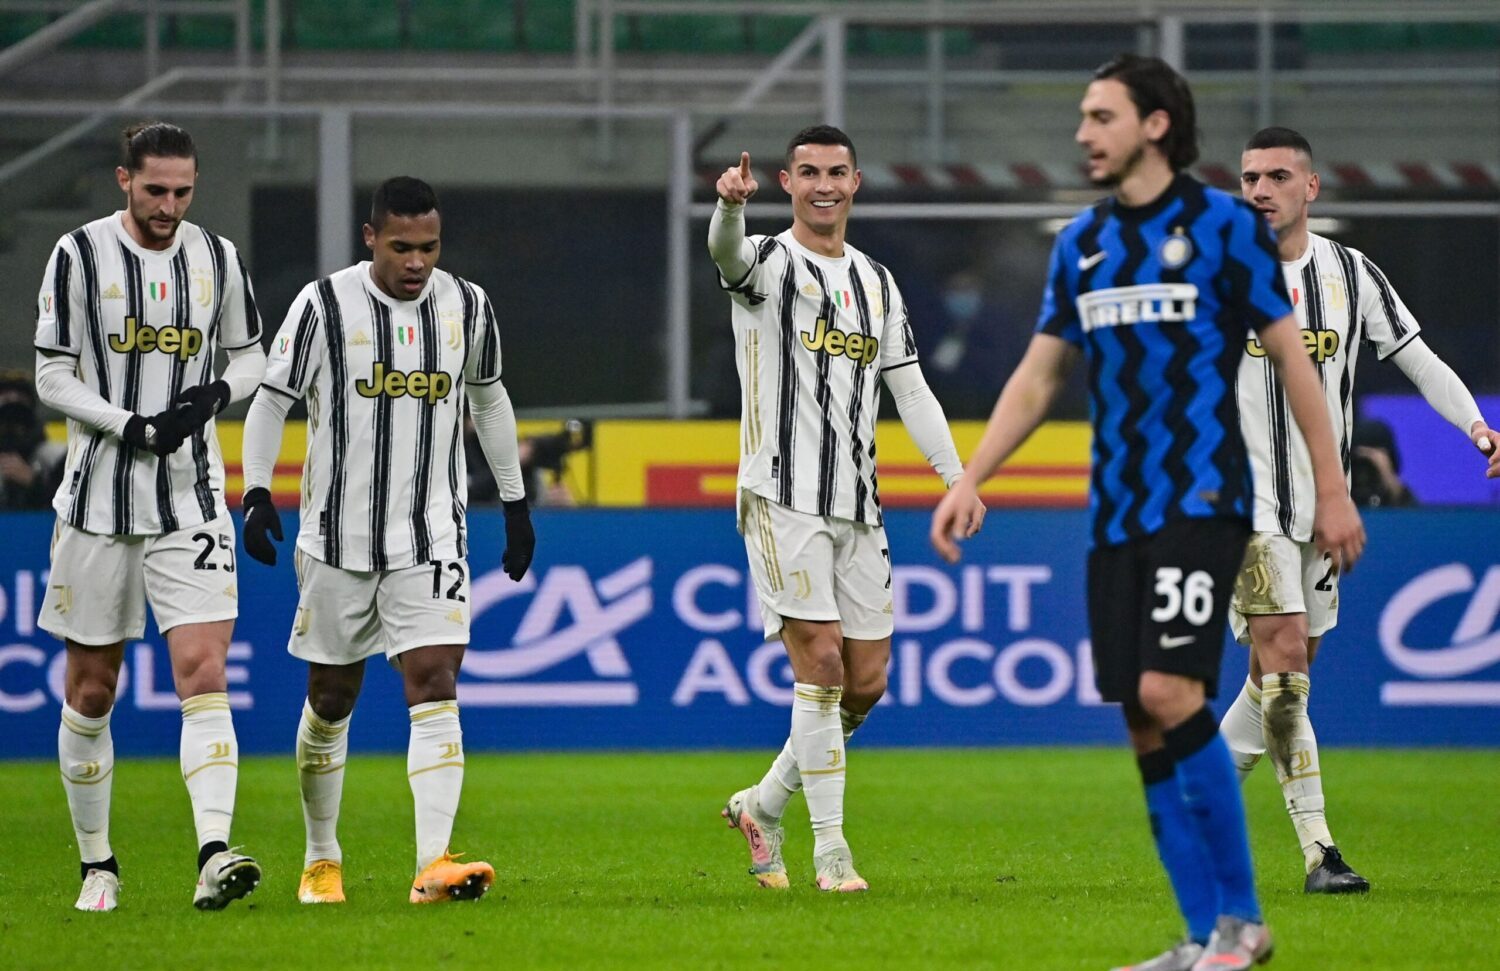 "Pazza Inter" let Juventus come from behind and record a 1-2 win in the first leg of the Coppa Italia Semi Final with a Cristiano Ronaldo brace